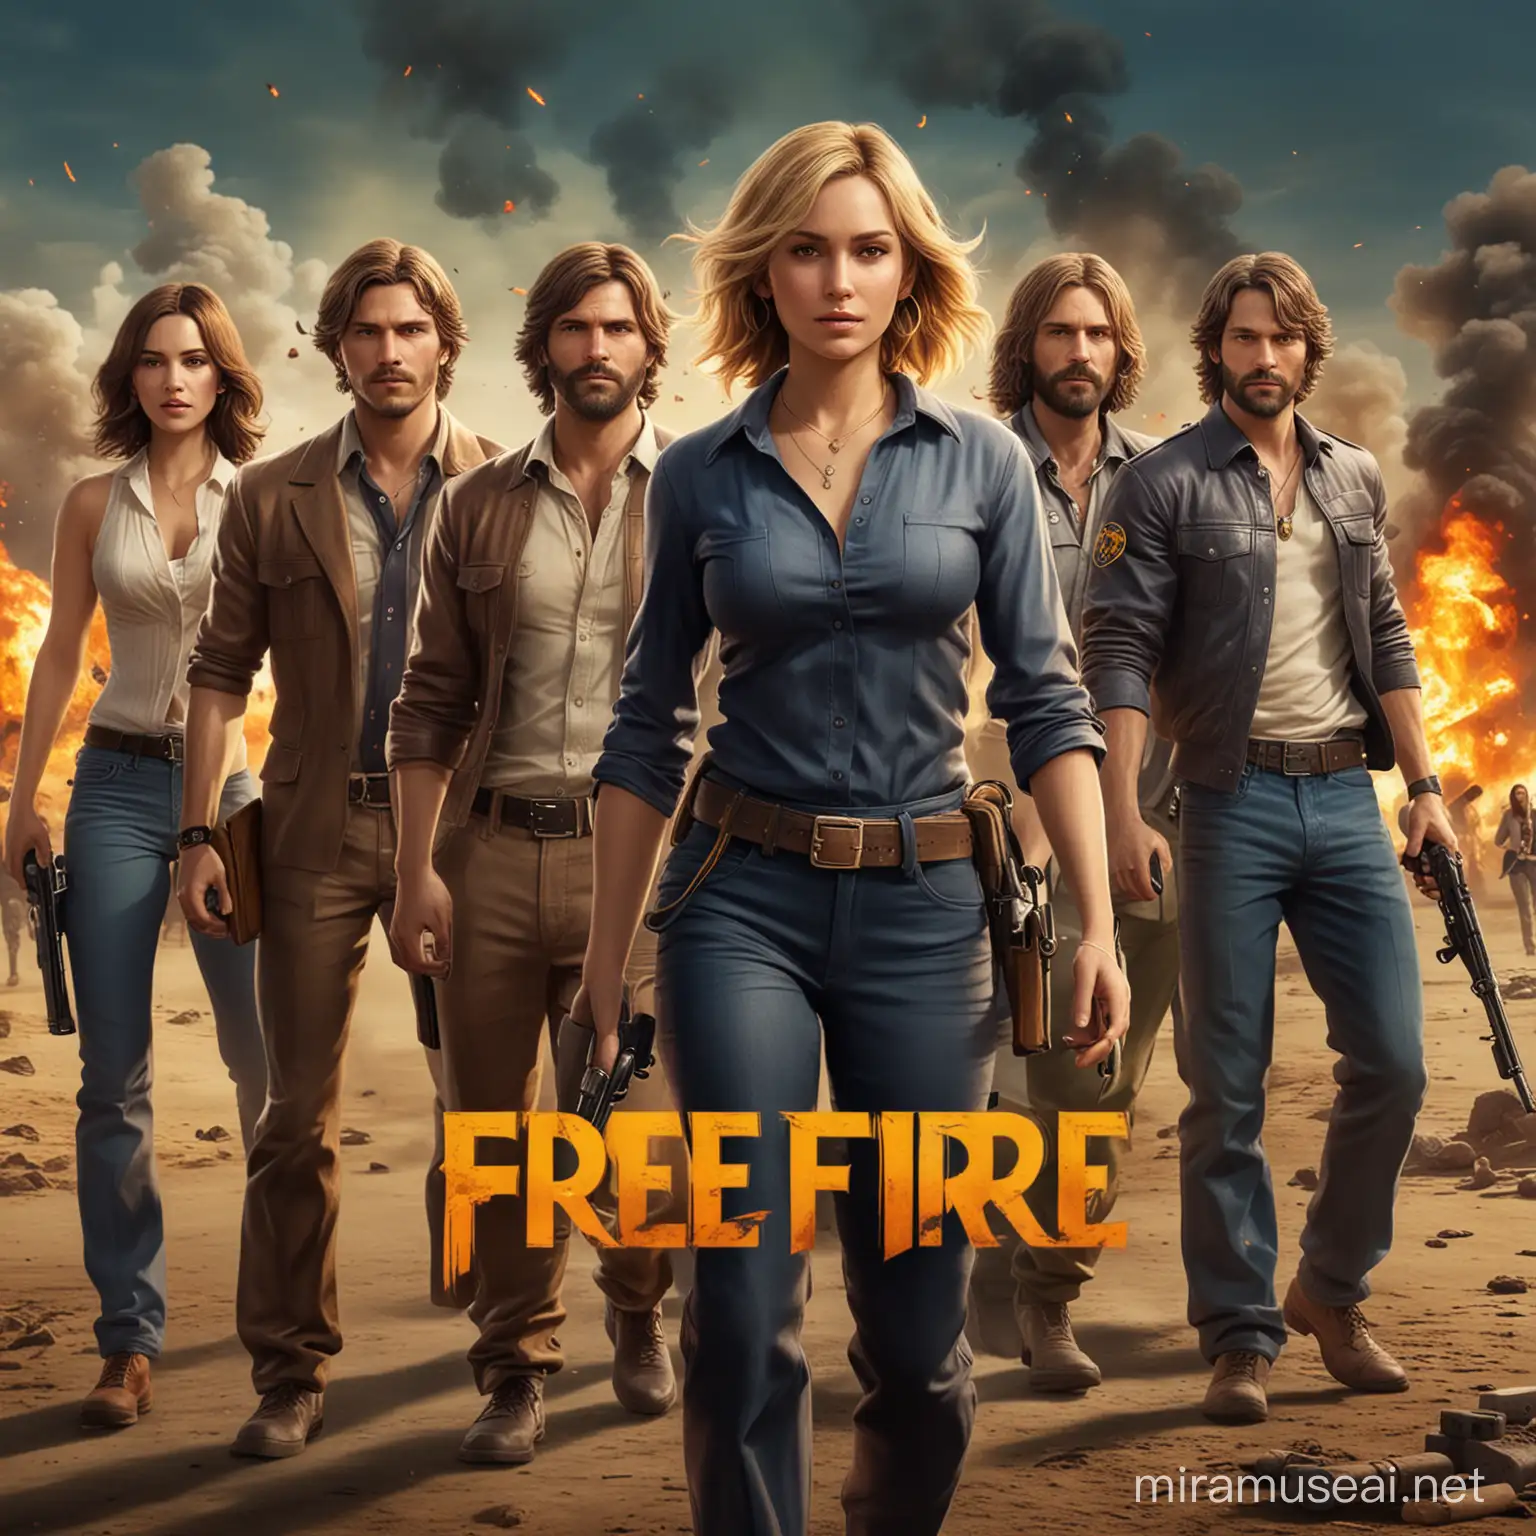 Intense Battle in the Flames Free Fire Action Scene